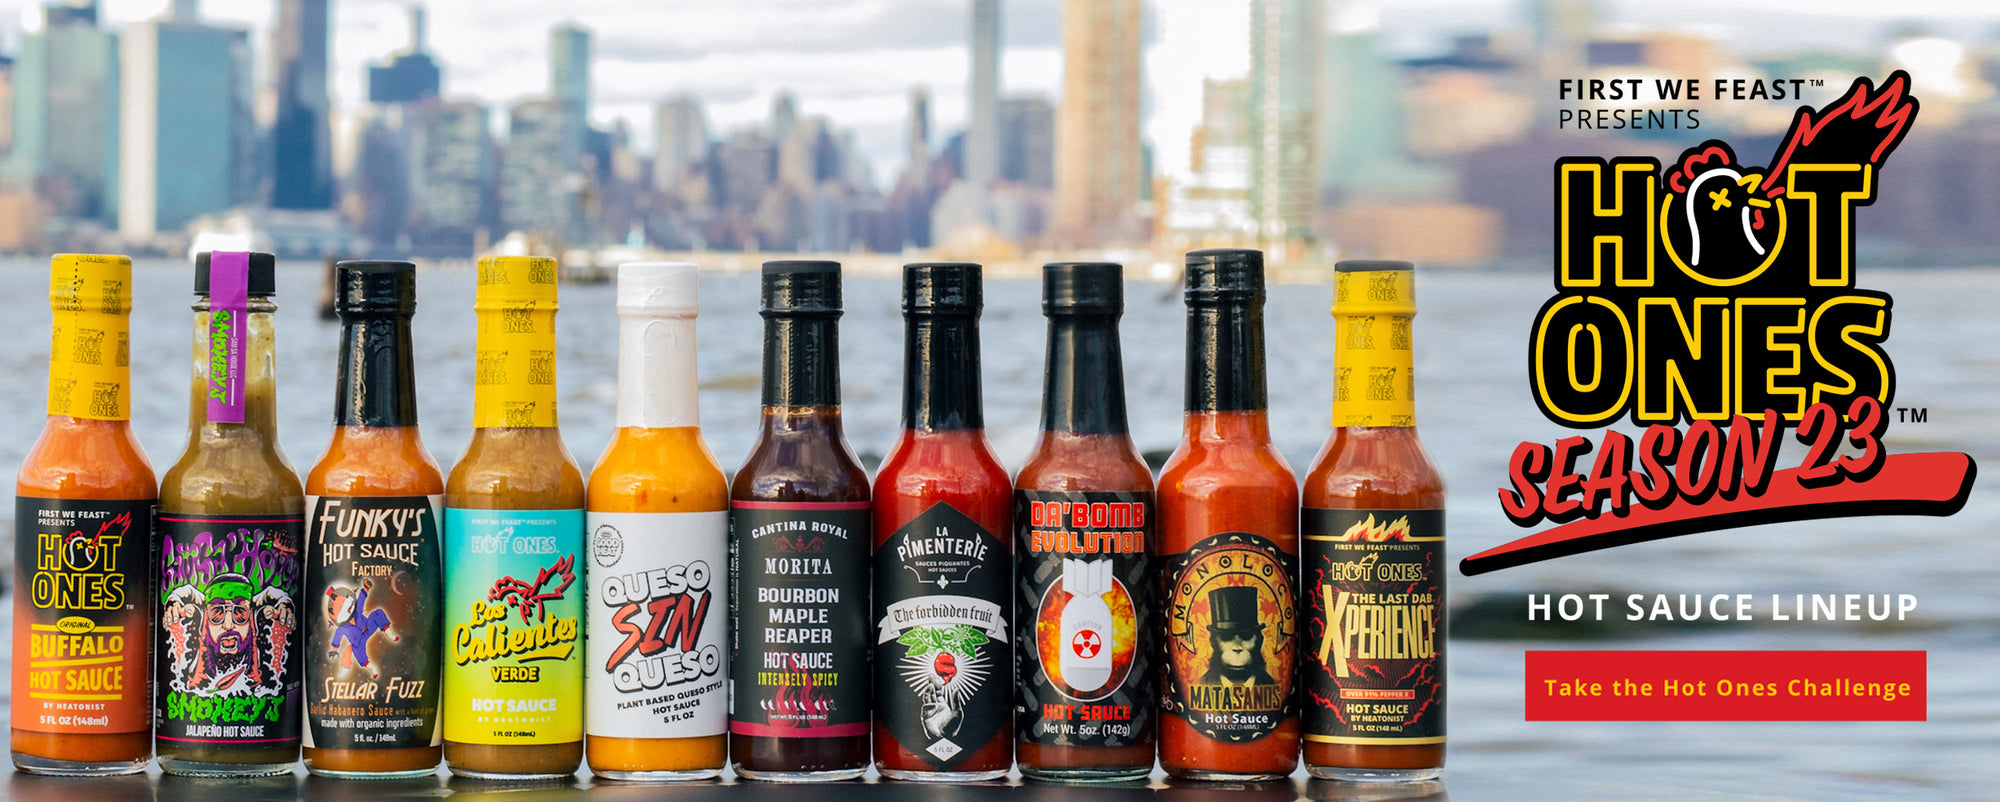 Here's Where to Buy the Hot Ones Hot Sauces Lineup – SPY